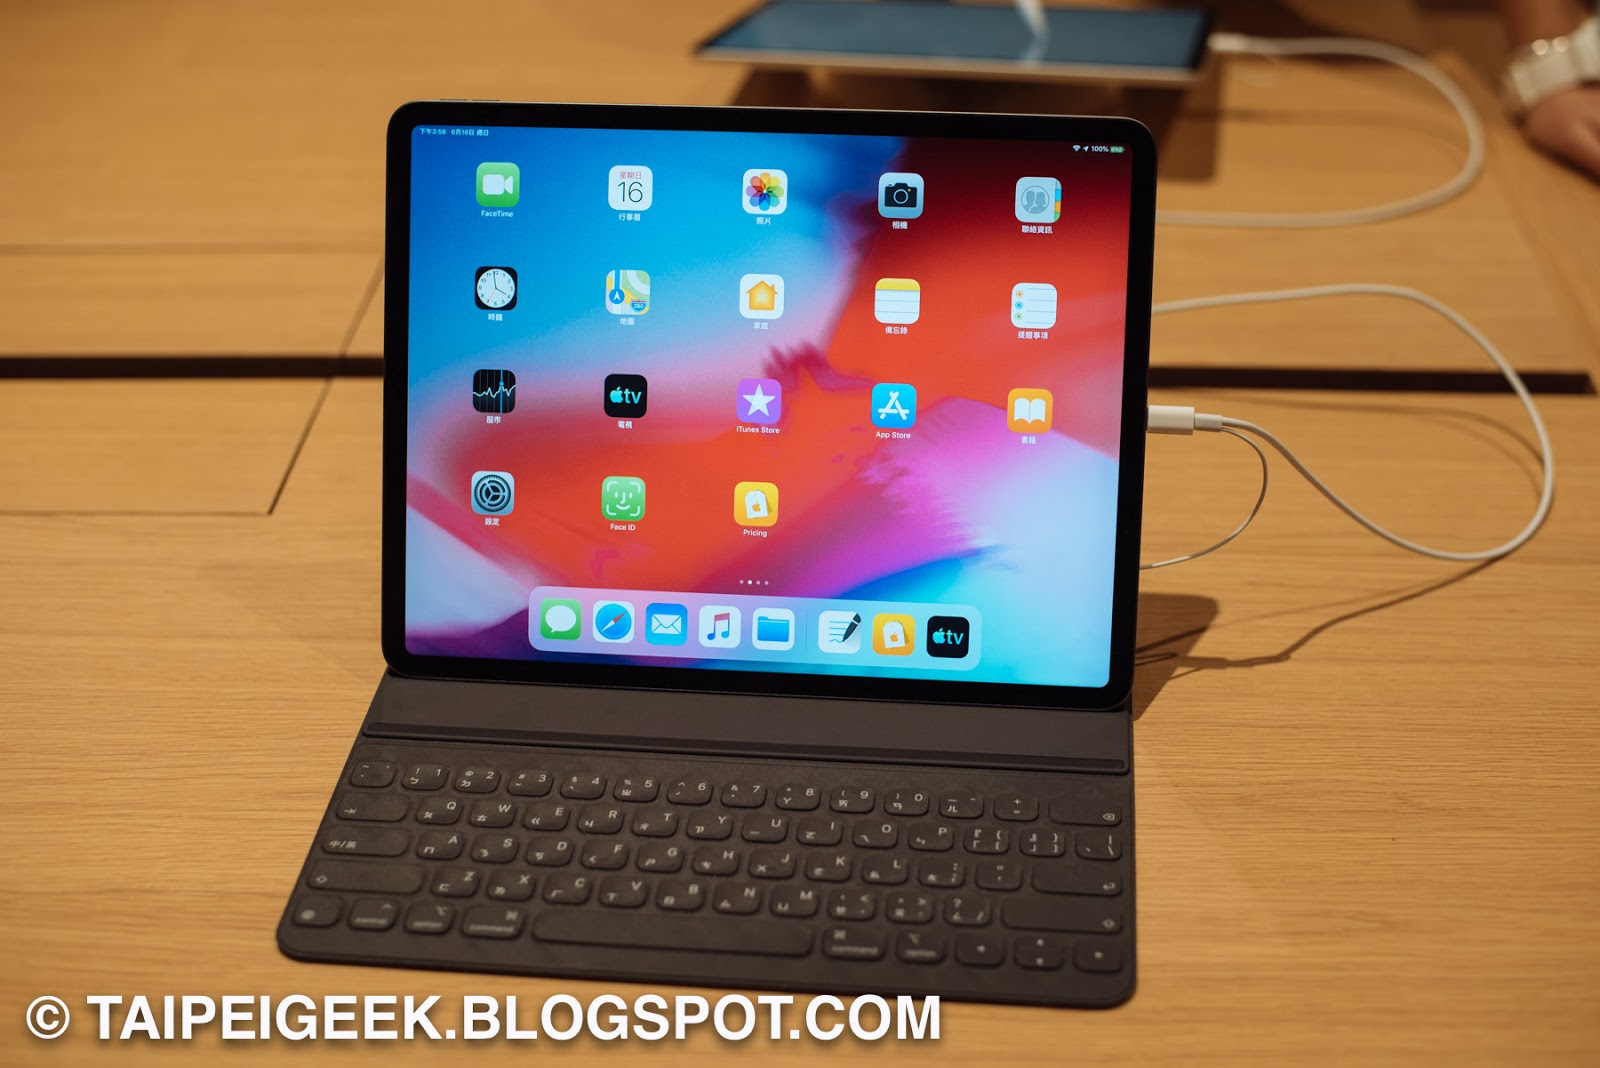 Updates About the Apple iPad Pro 2 in the Philippines